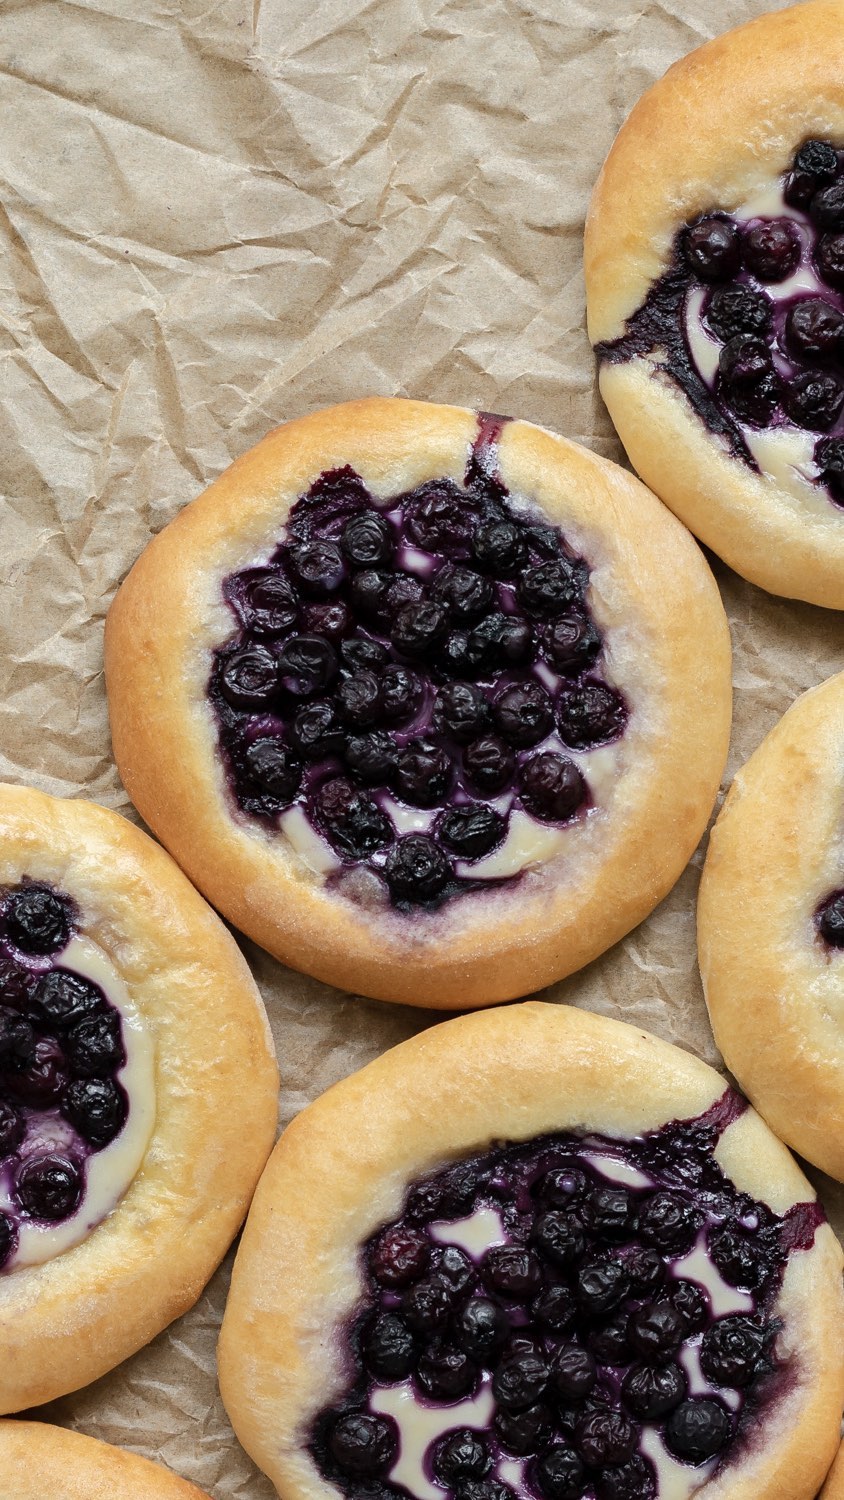 Brioche Buns with Cheesecake and Wild Blueberry Filling